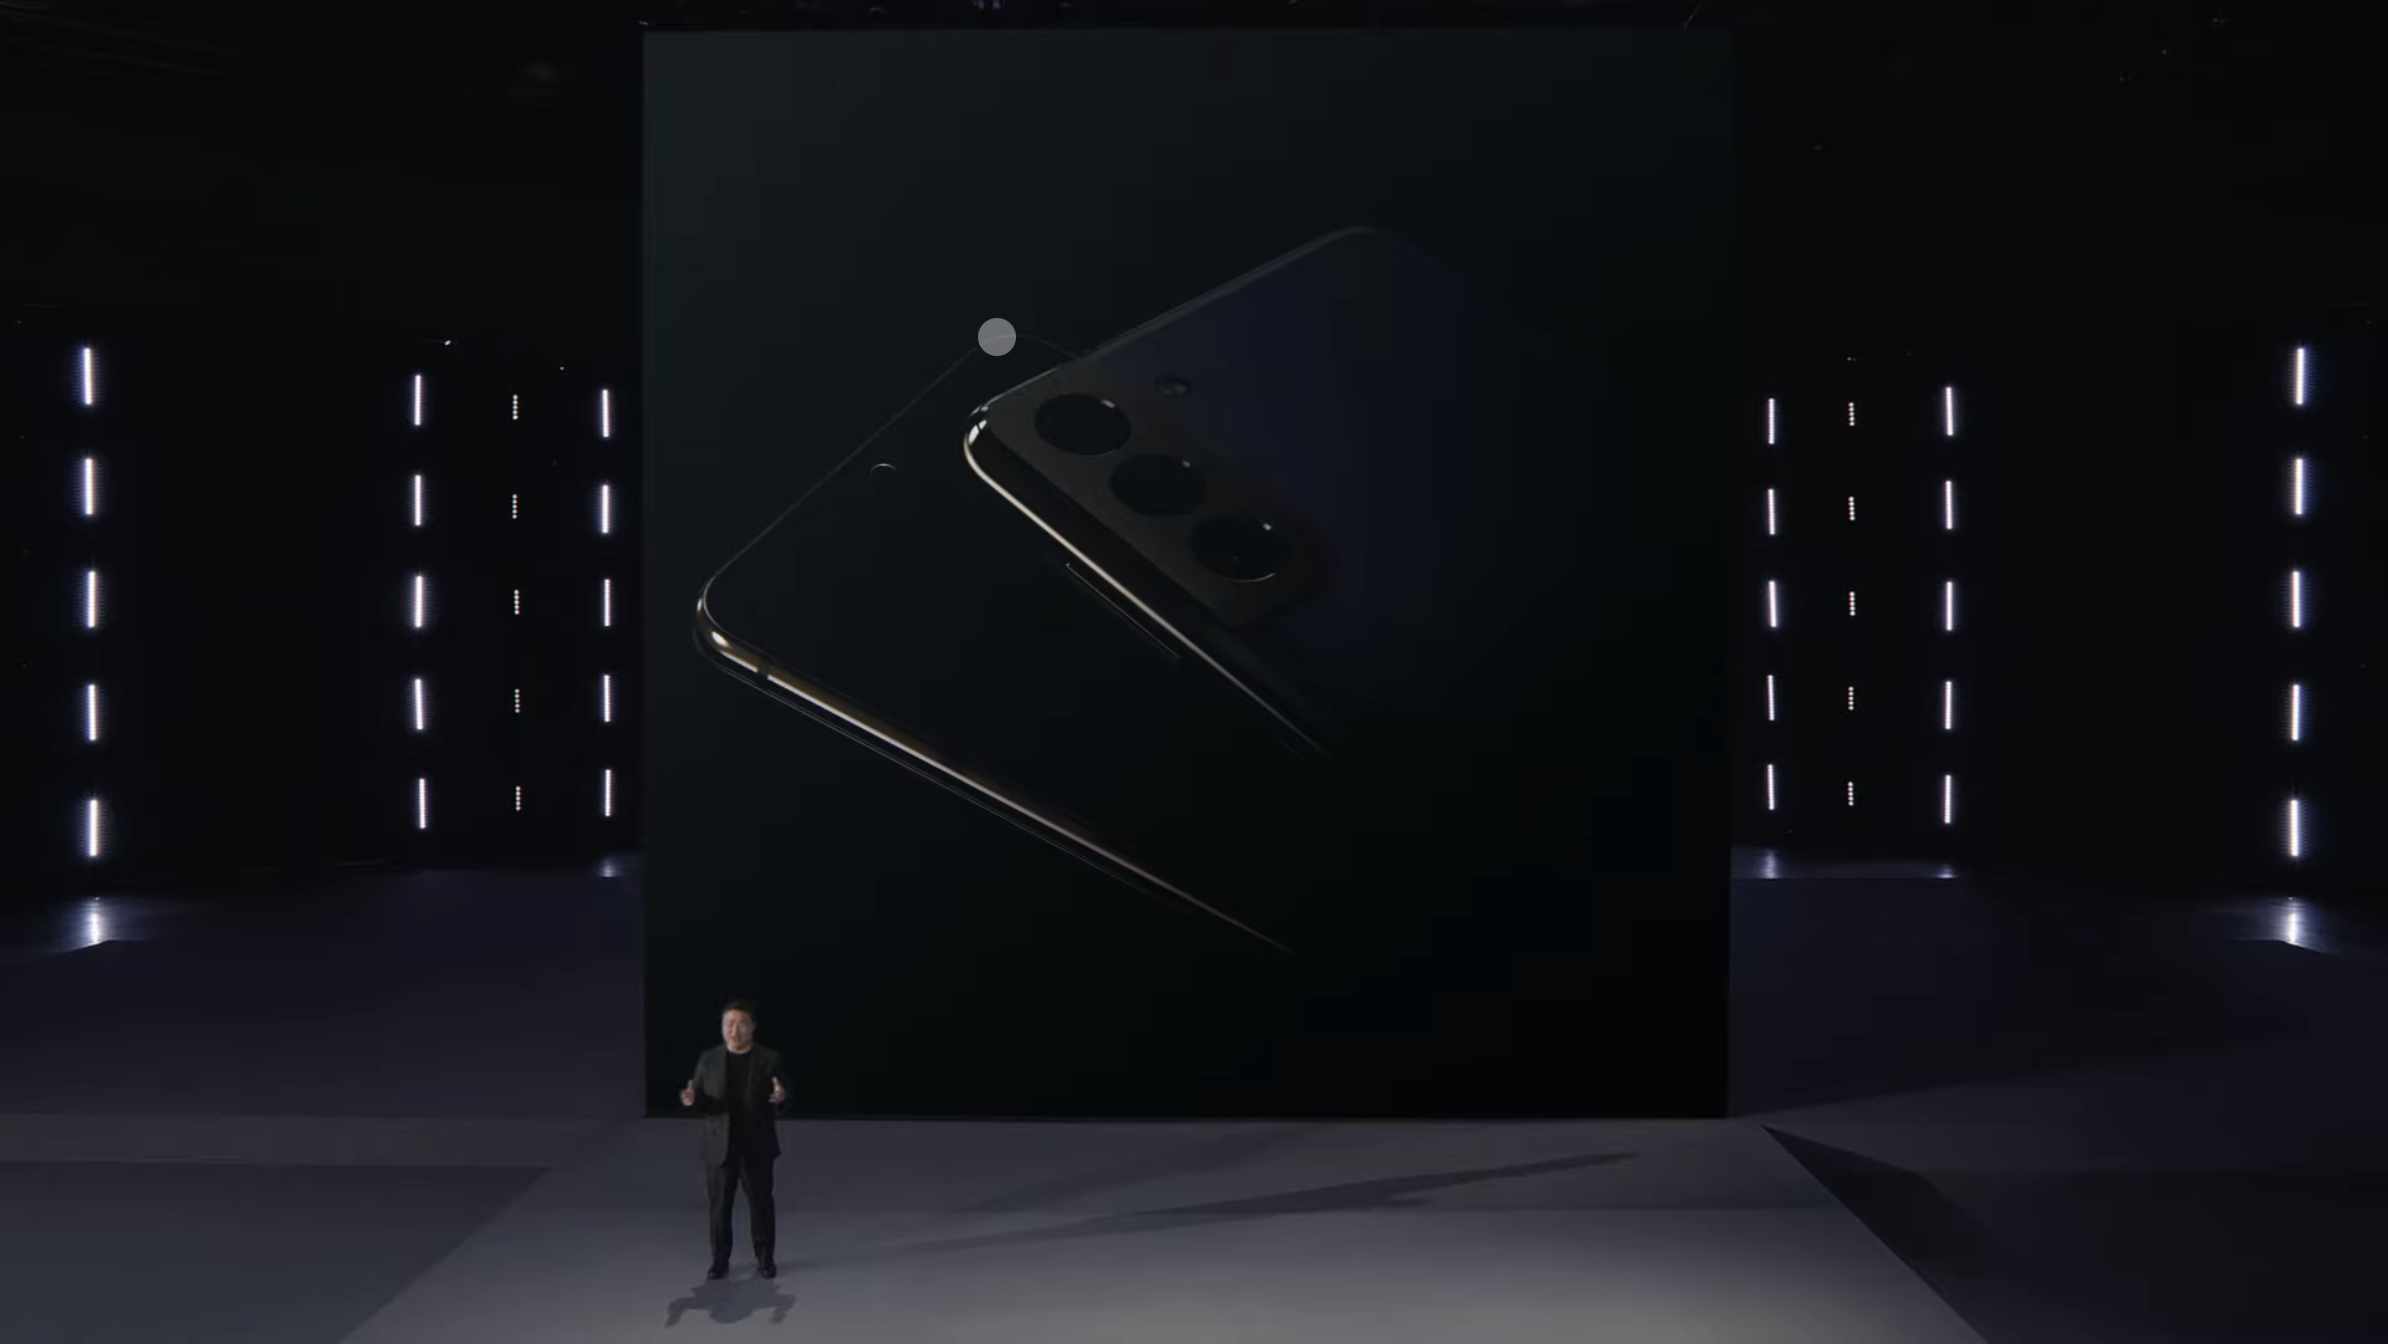 Samsung Galaxy Unpacked January 2021 Watch The Virtual Event Replay